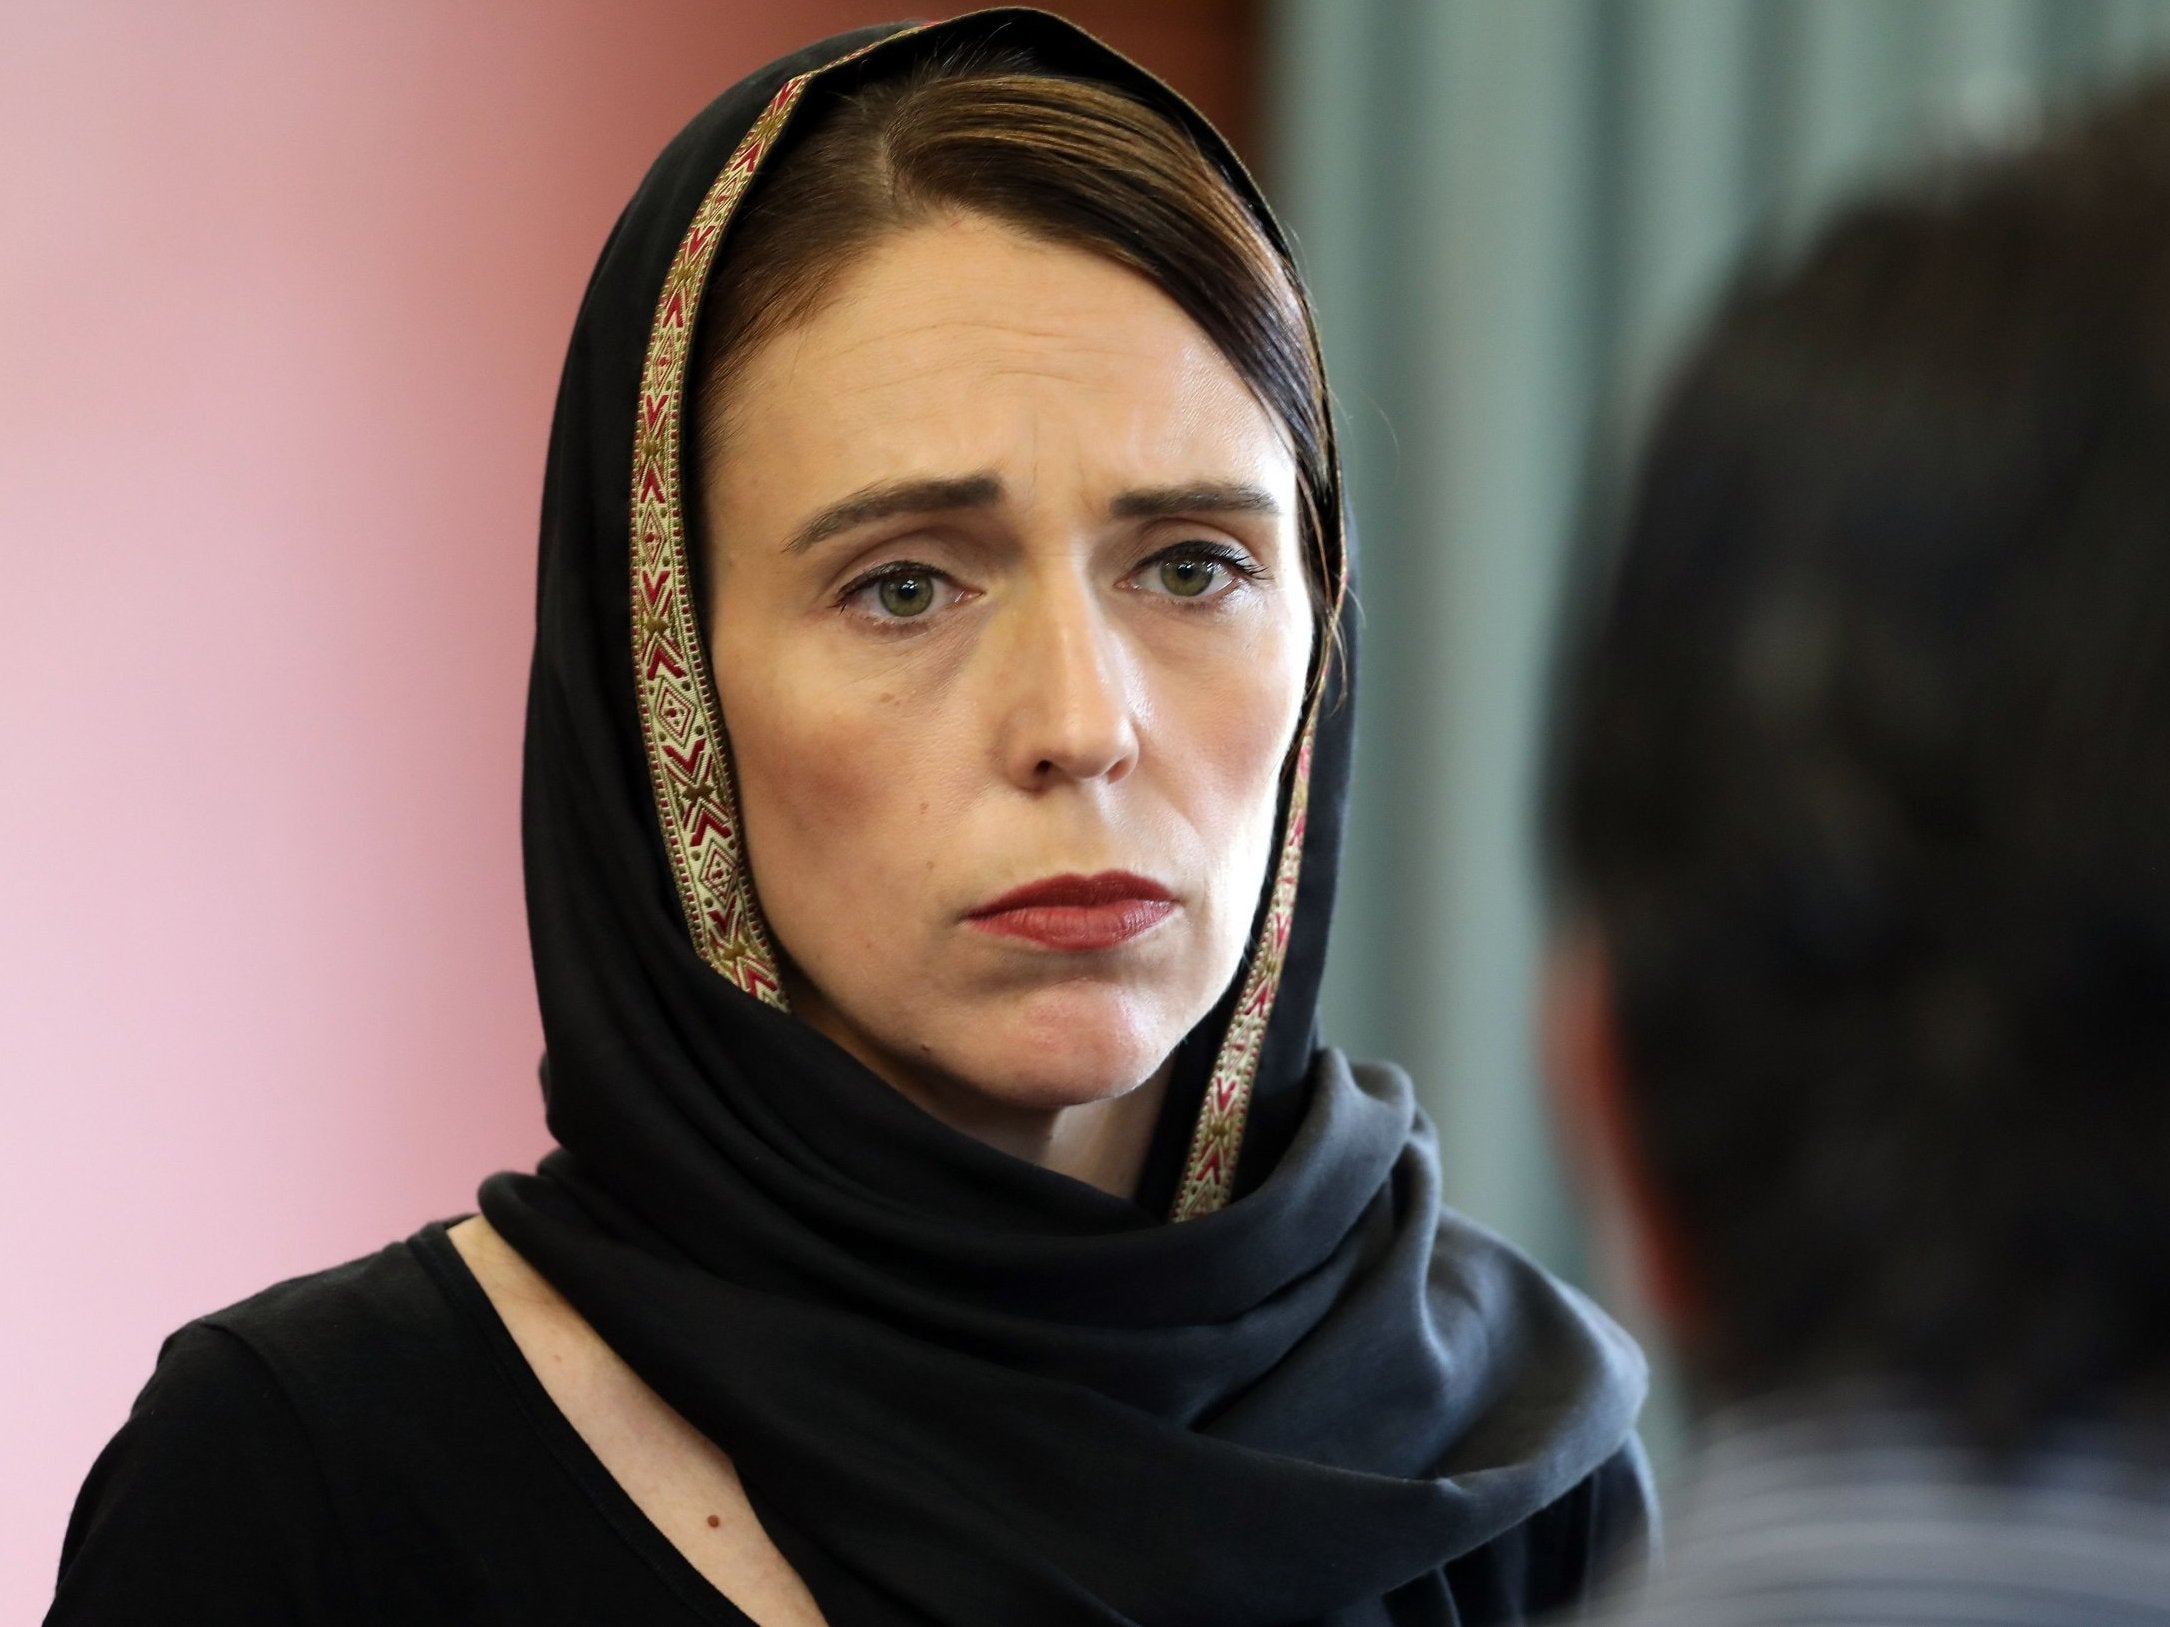 New Zealand prime minister Jacinda Ardern has received worldwide praise for her response to the the Chirstchurch mosque shootings